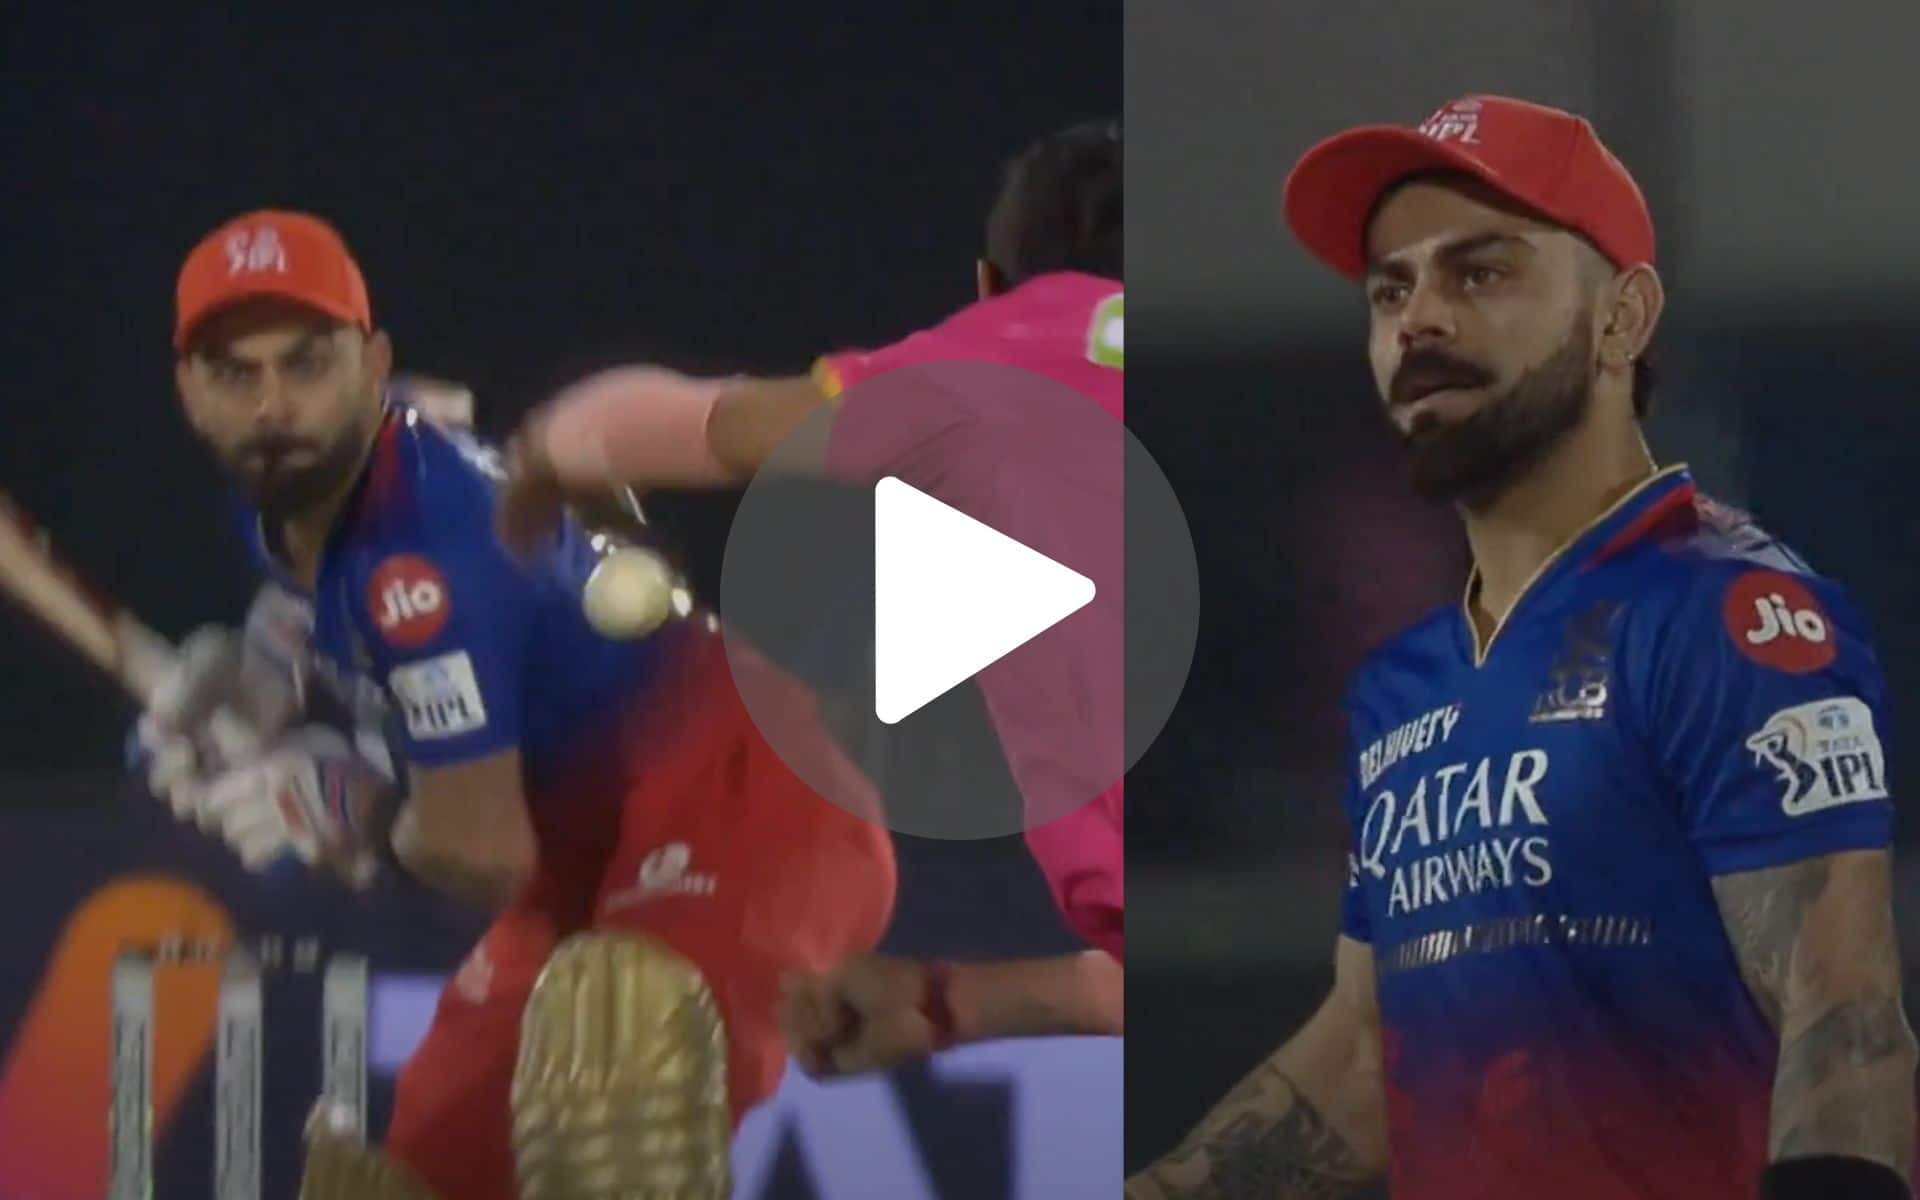 [Watch] Kohli Gives Chahal A Stare After Smashing A Might Maximum Before Record Century